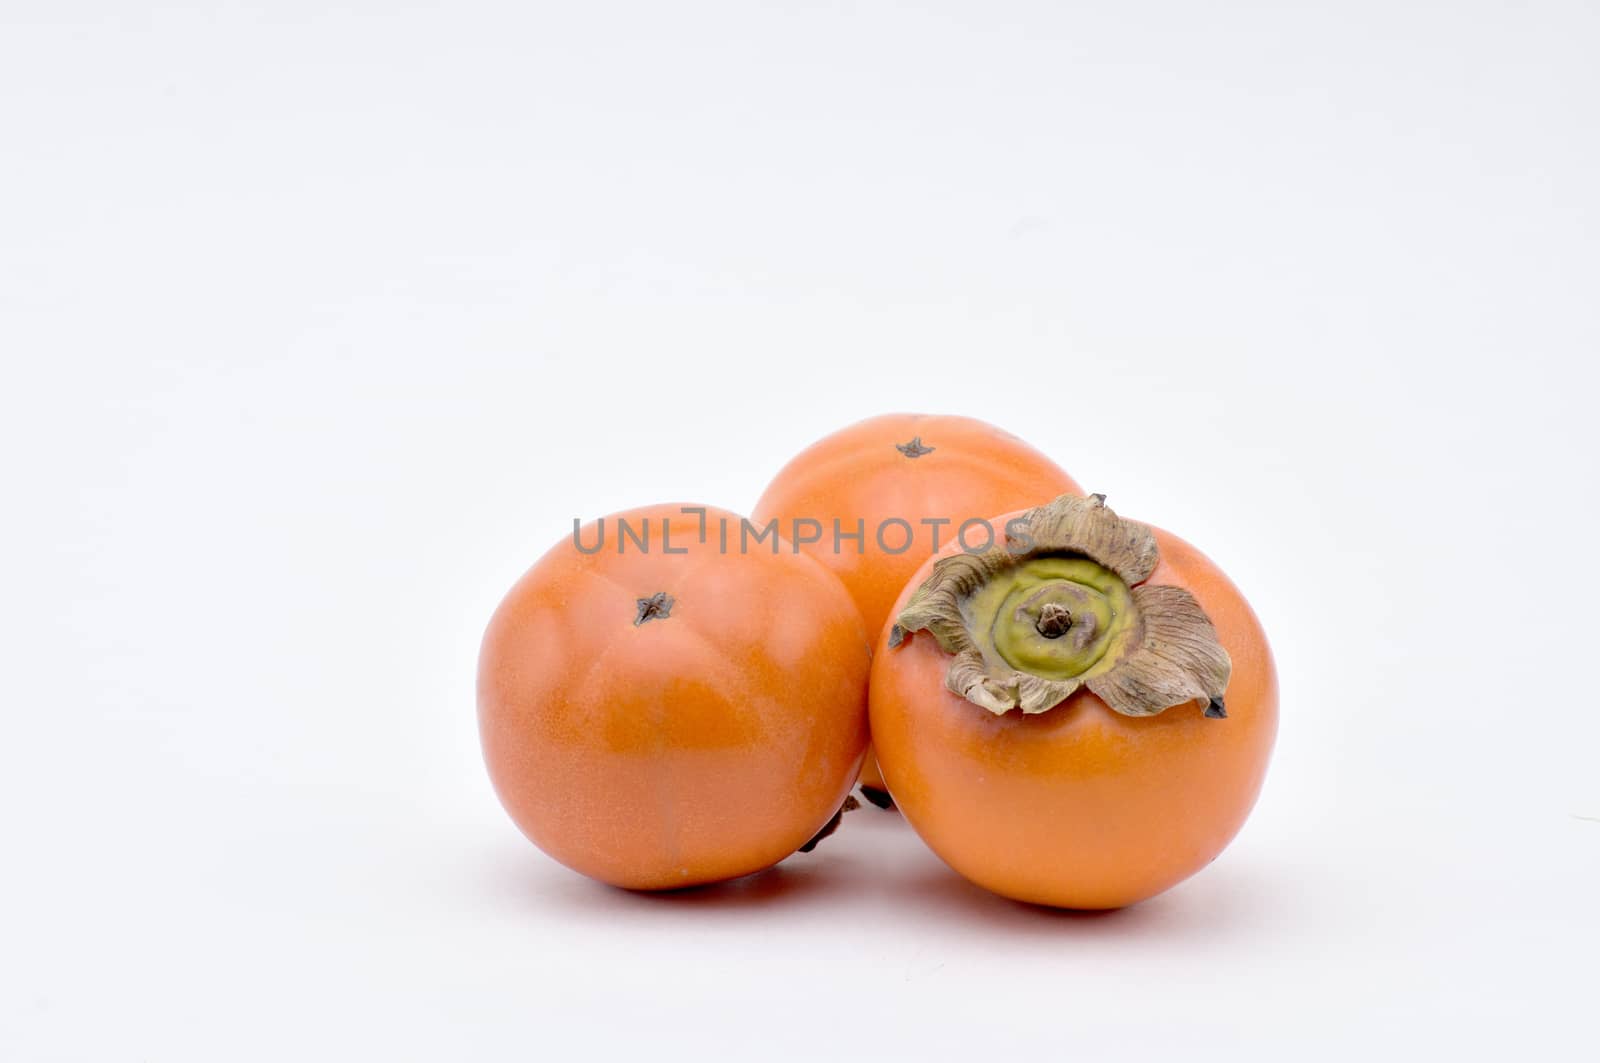 Persimmon,southern fruit of orange-red color,sweet and astringent to taste.
